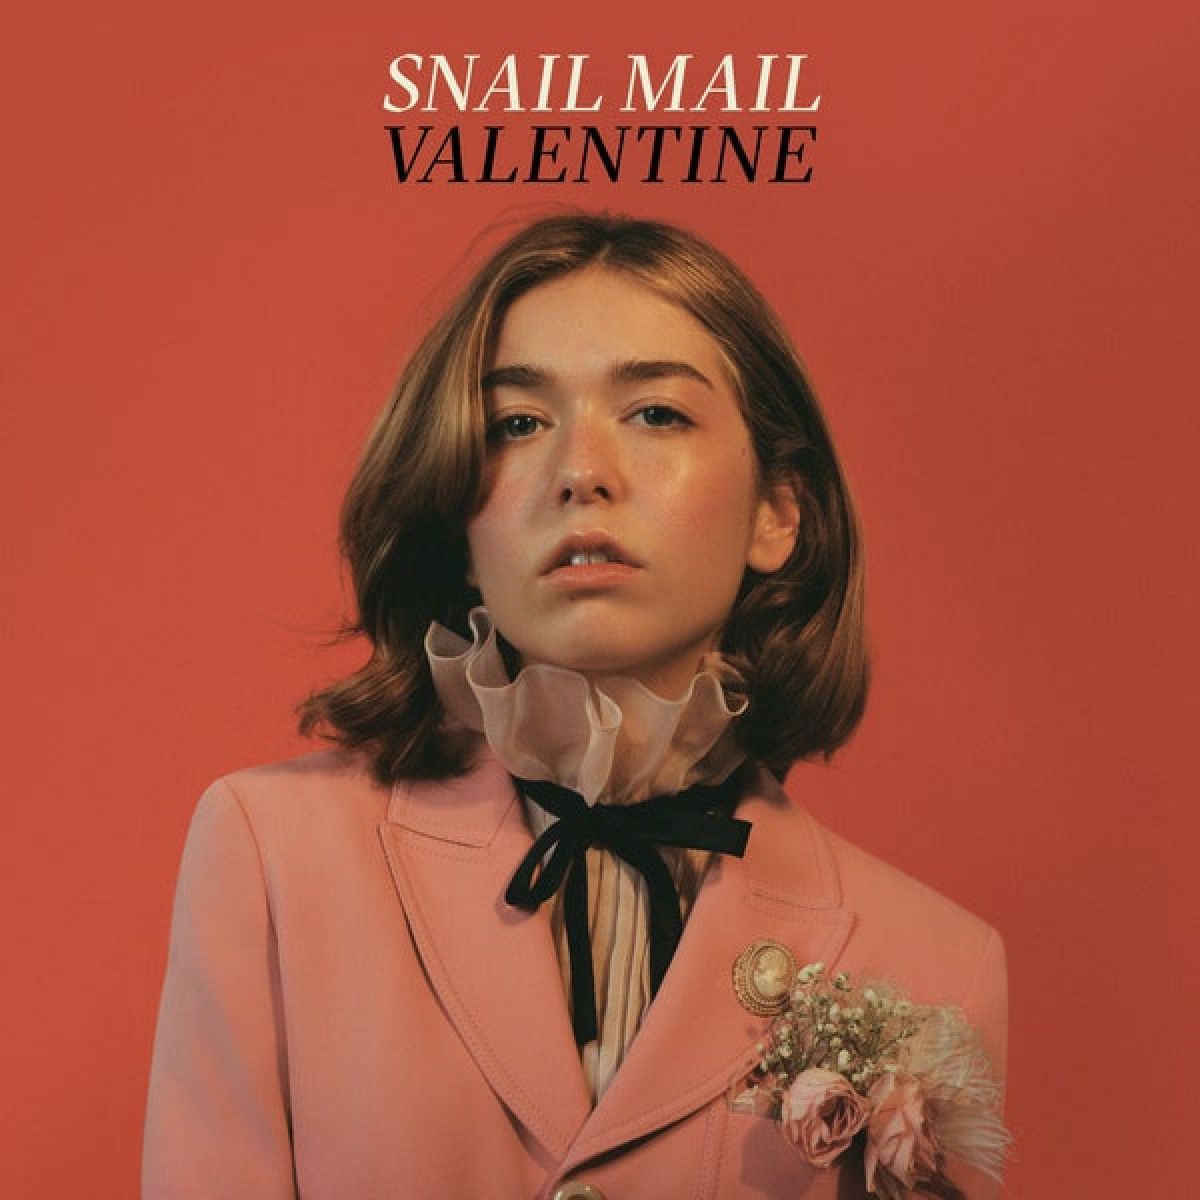 Valentine: the wistfully transparent sophomore album from Snail Mail